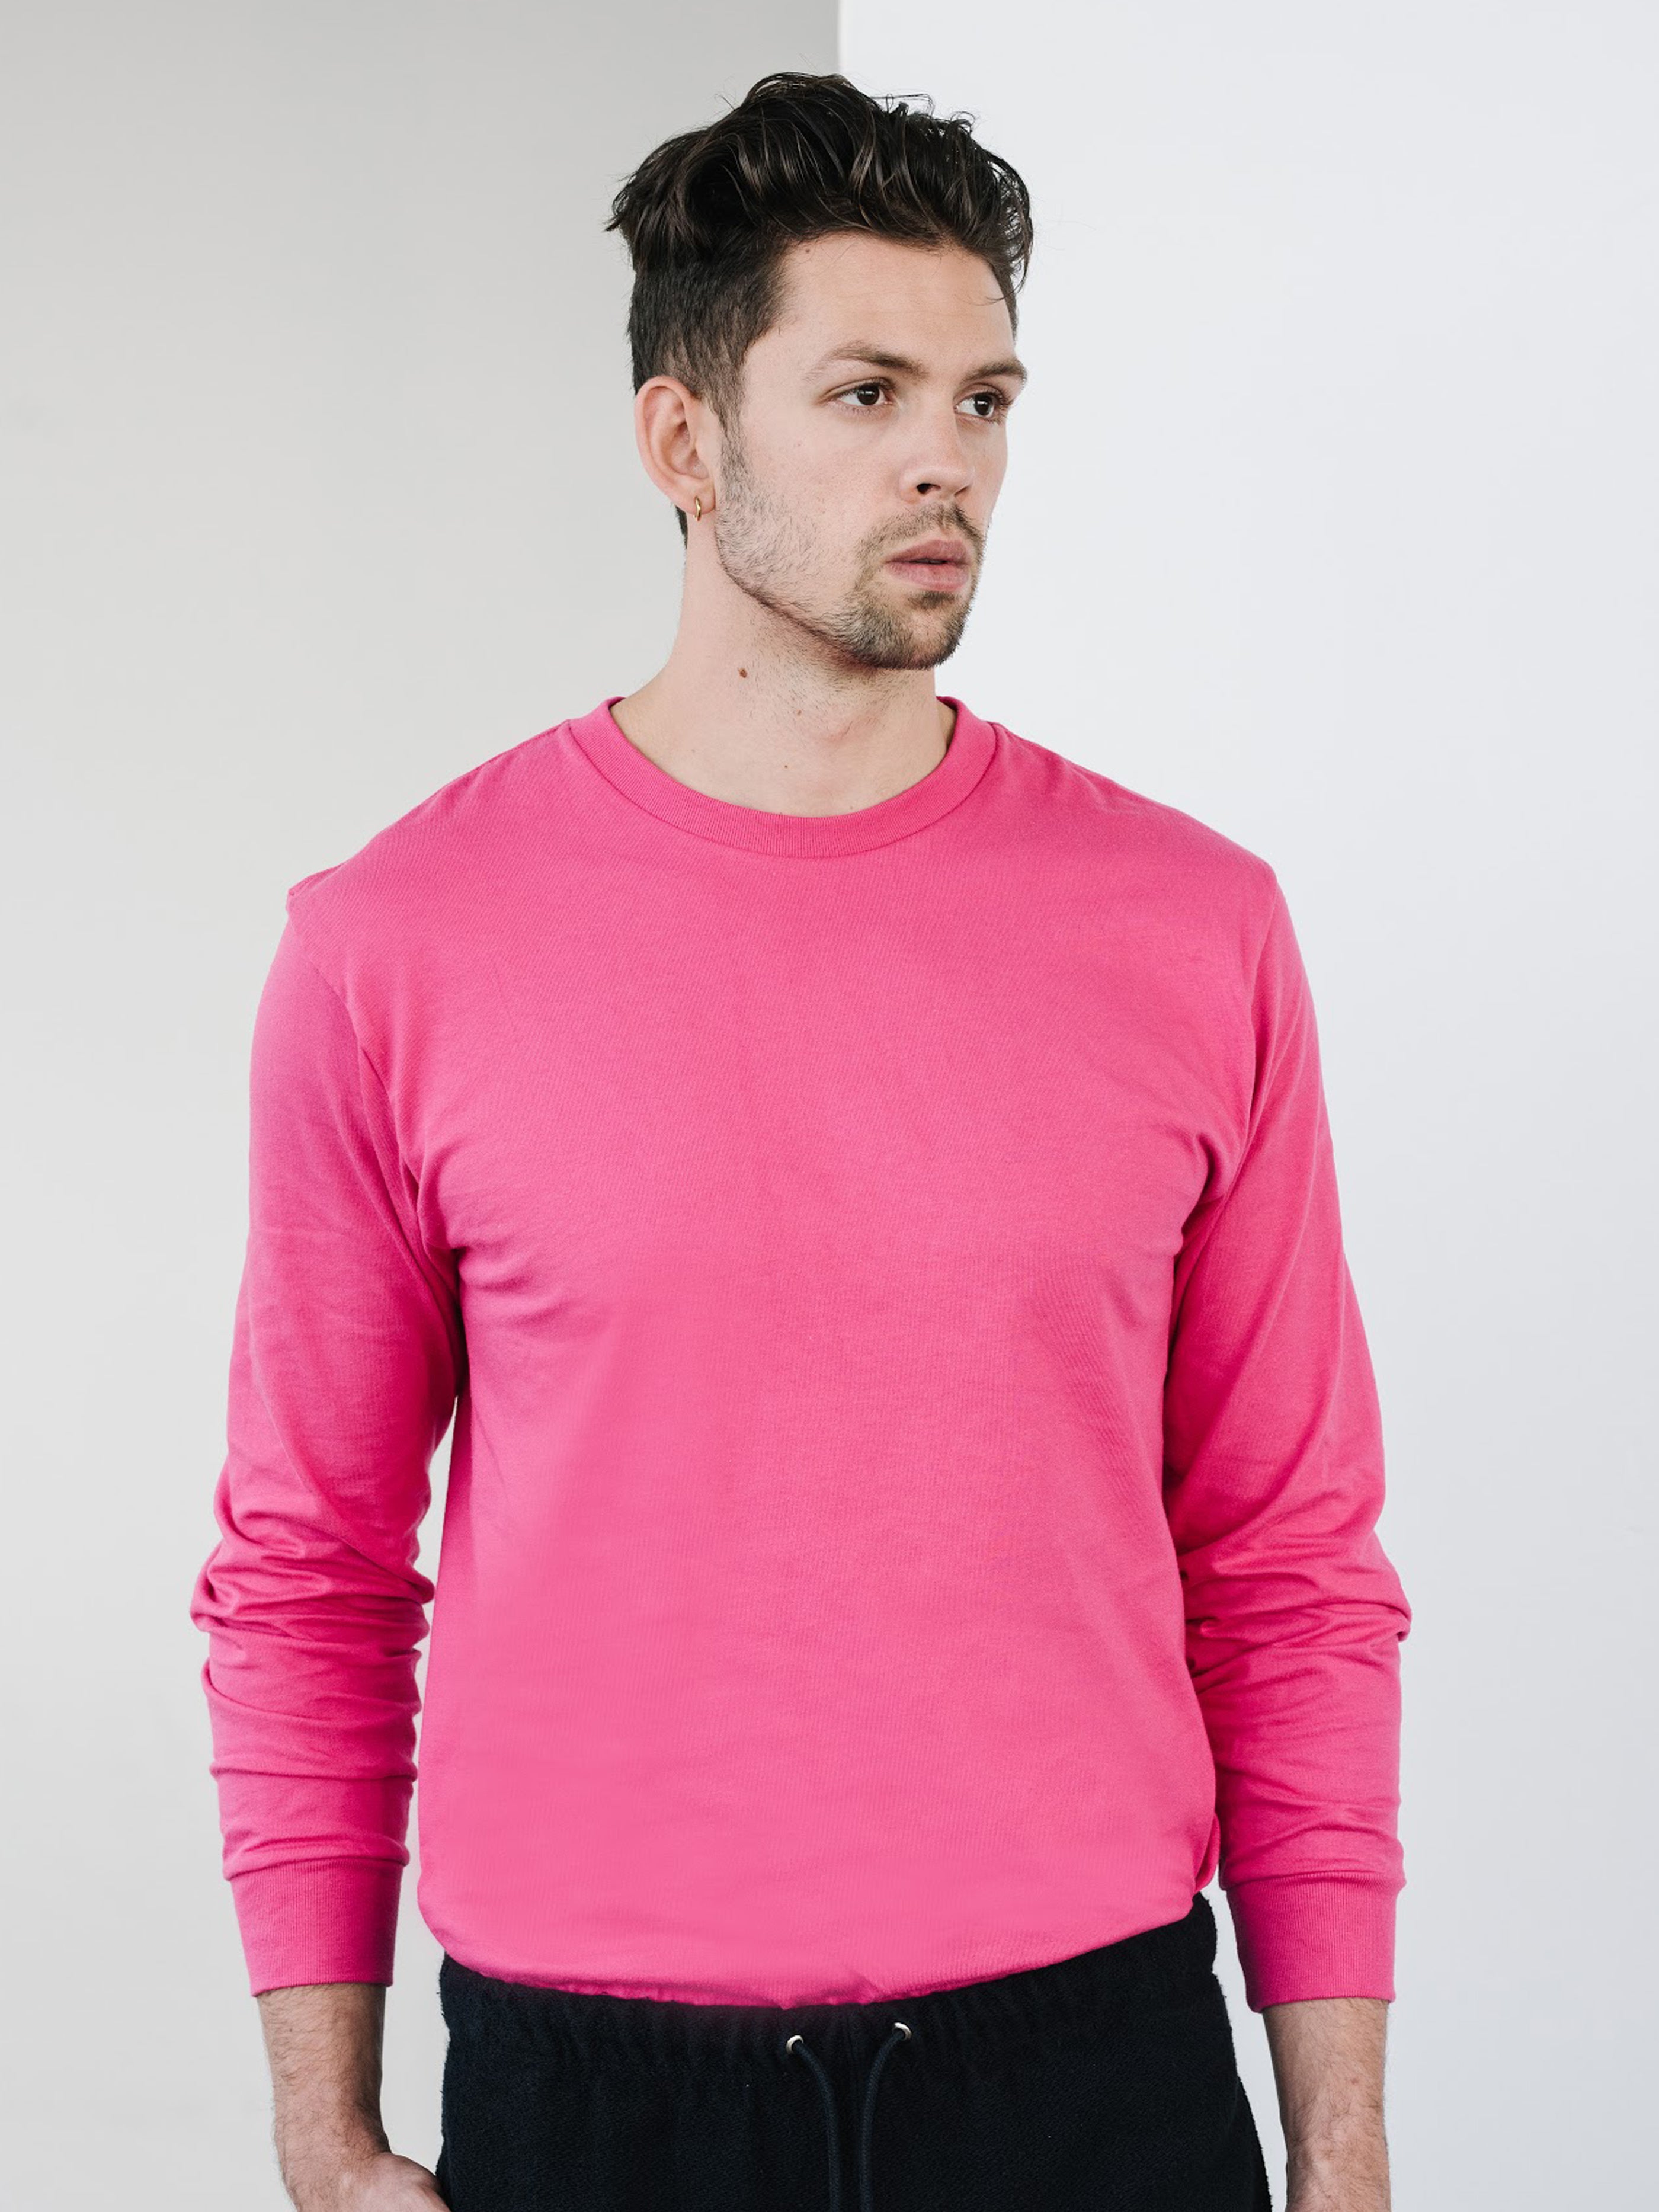 Jersey L/S Tee - Hot Pink